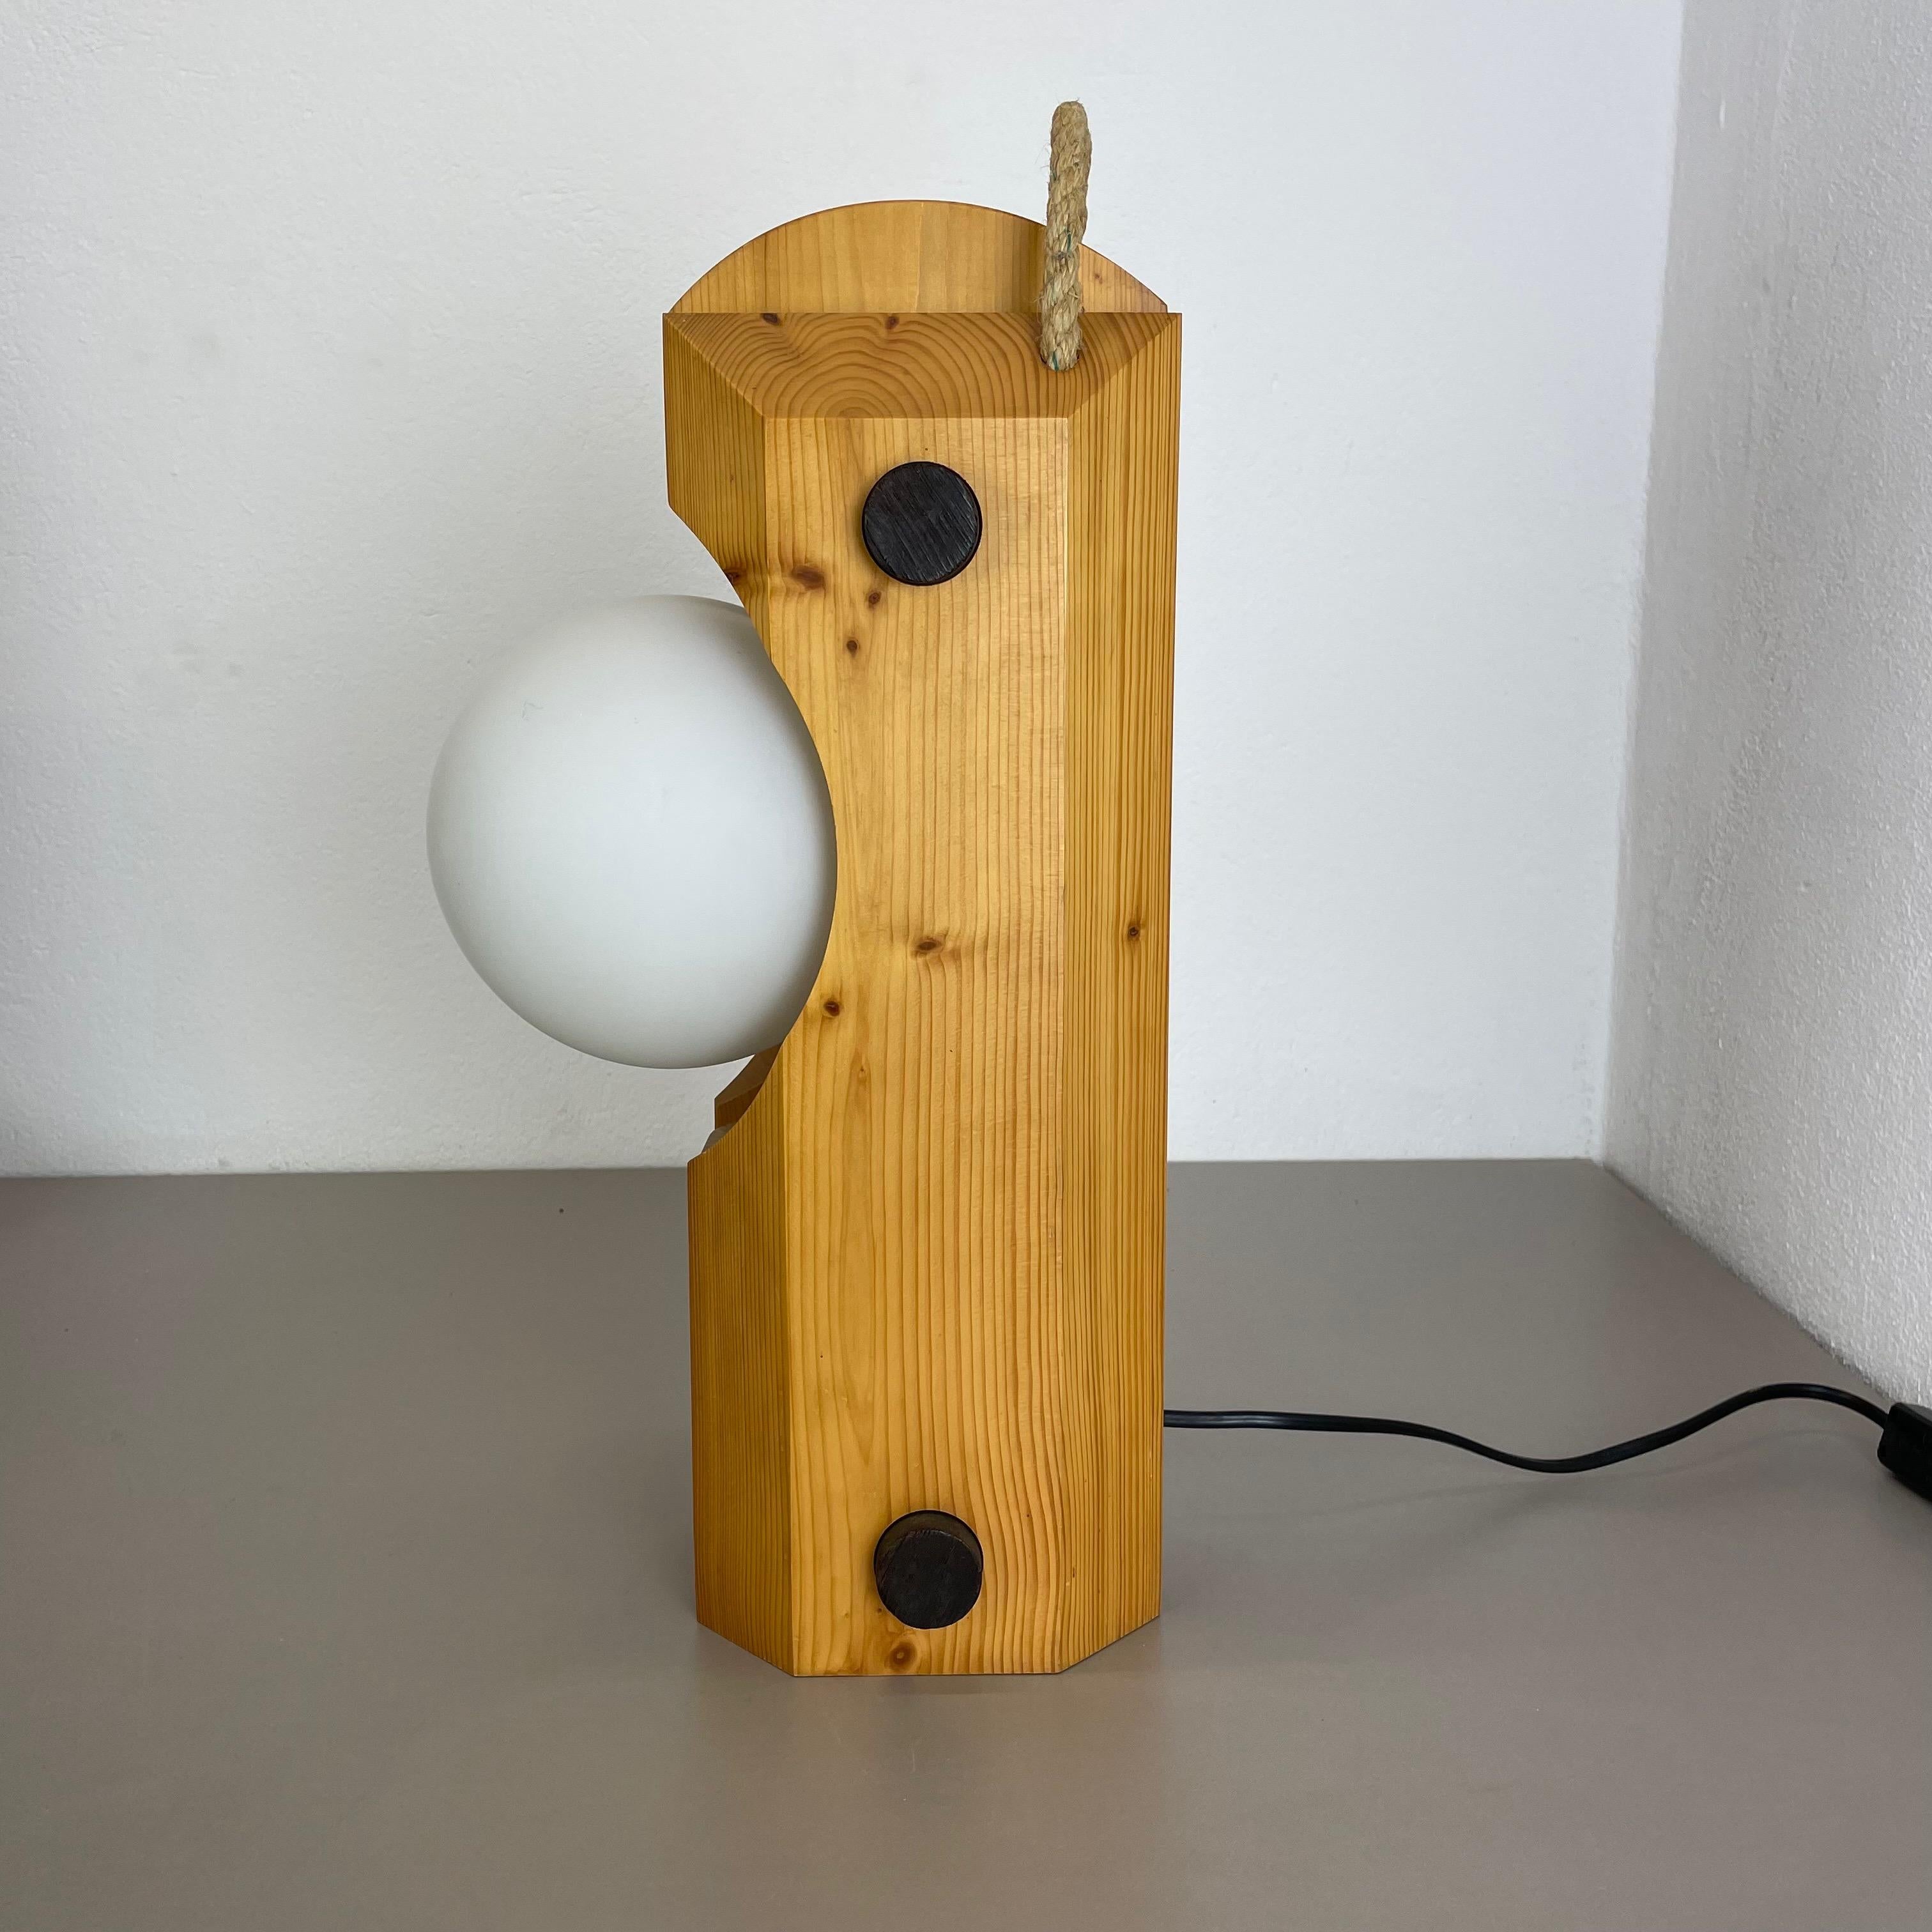 Large Organic Sculptural PINE Wooden Table Light by Temde Lights, Germany 1970s For Sale 5